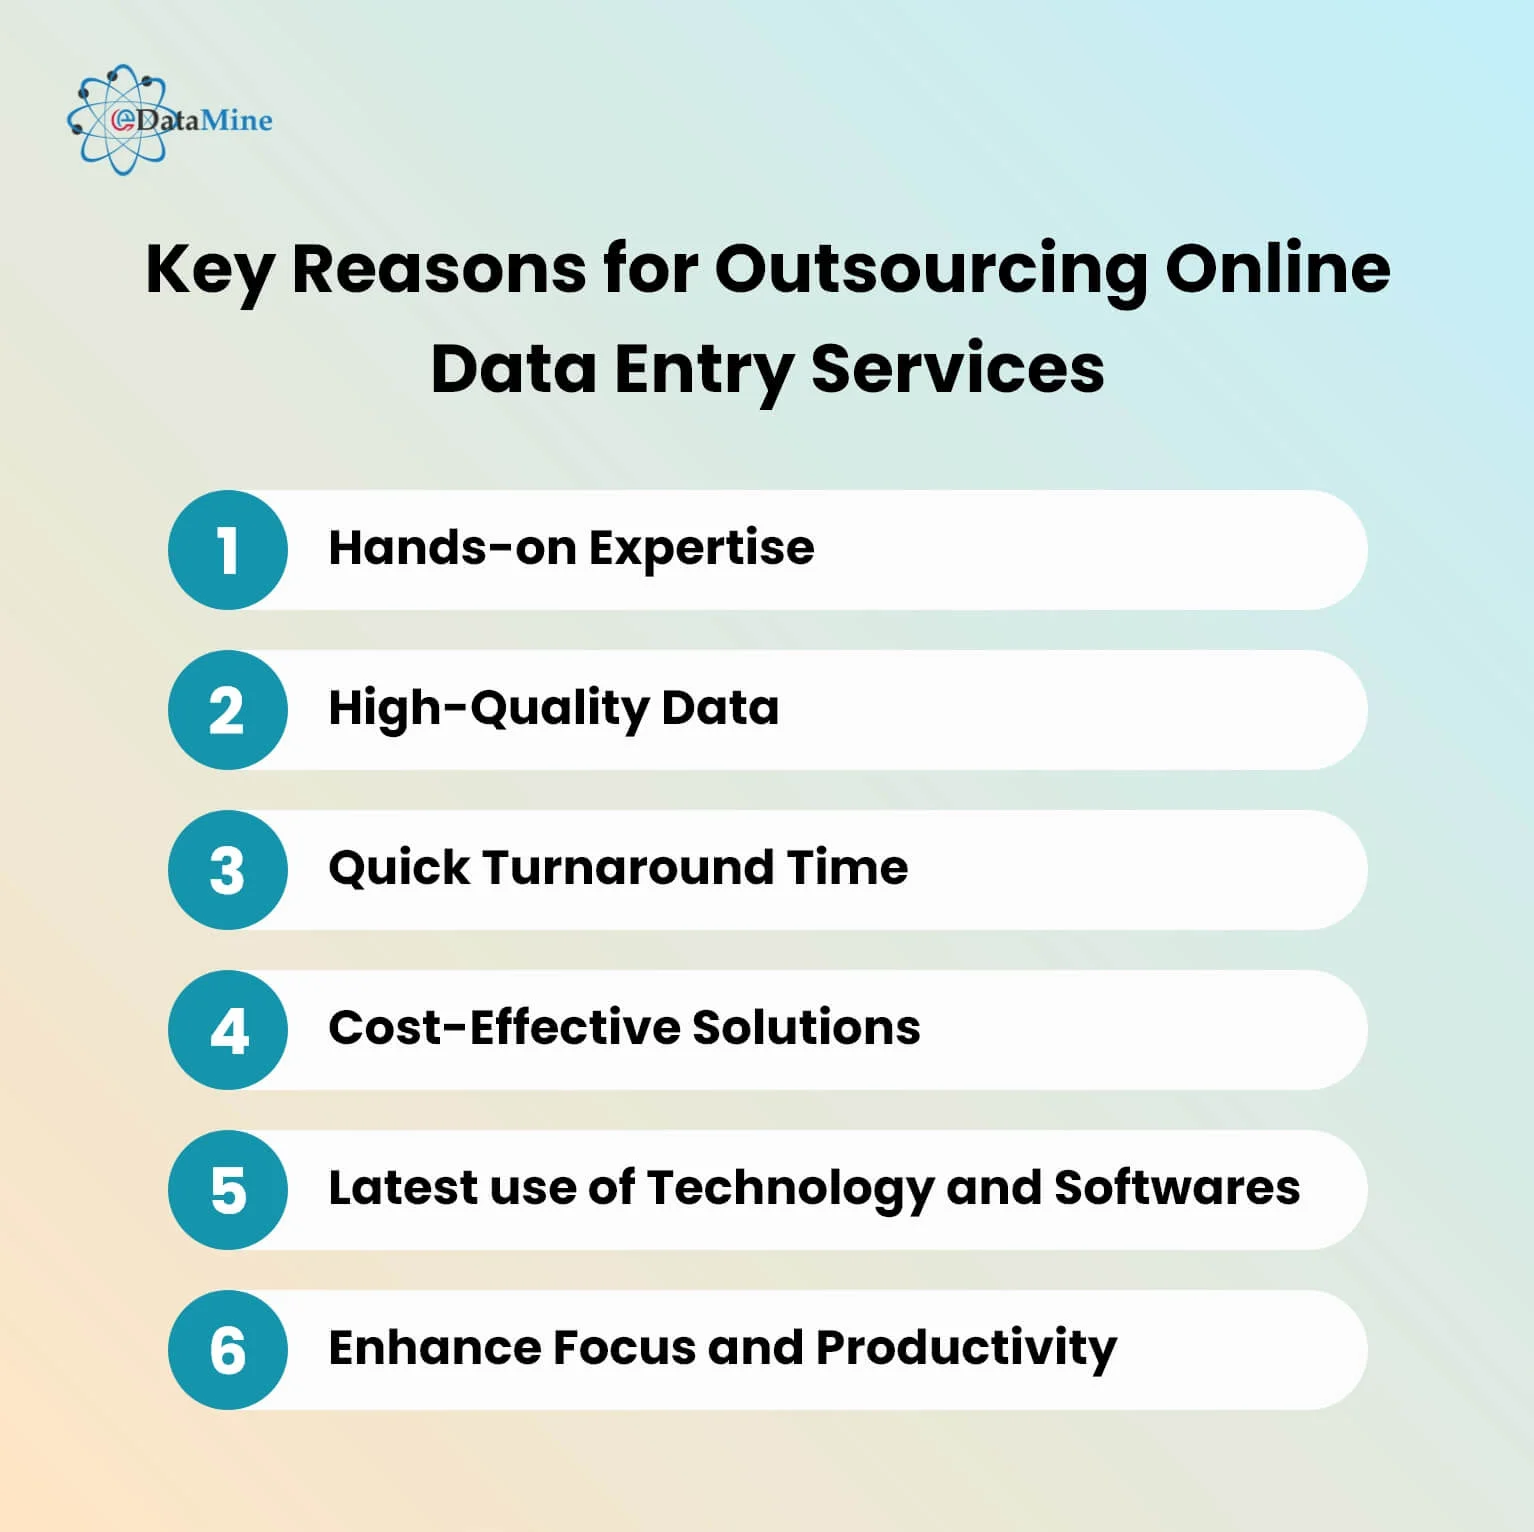 Key Reasons for Outsourcing Online Data Entry Services